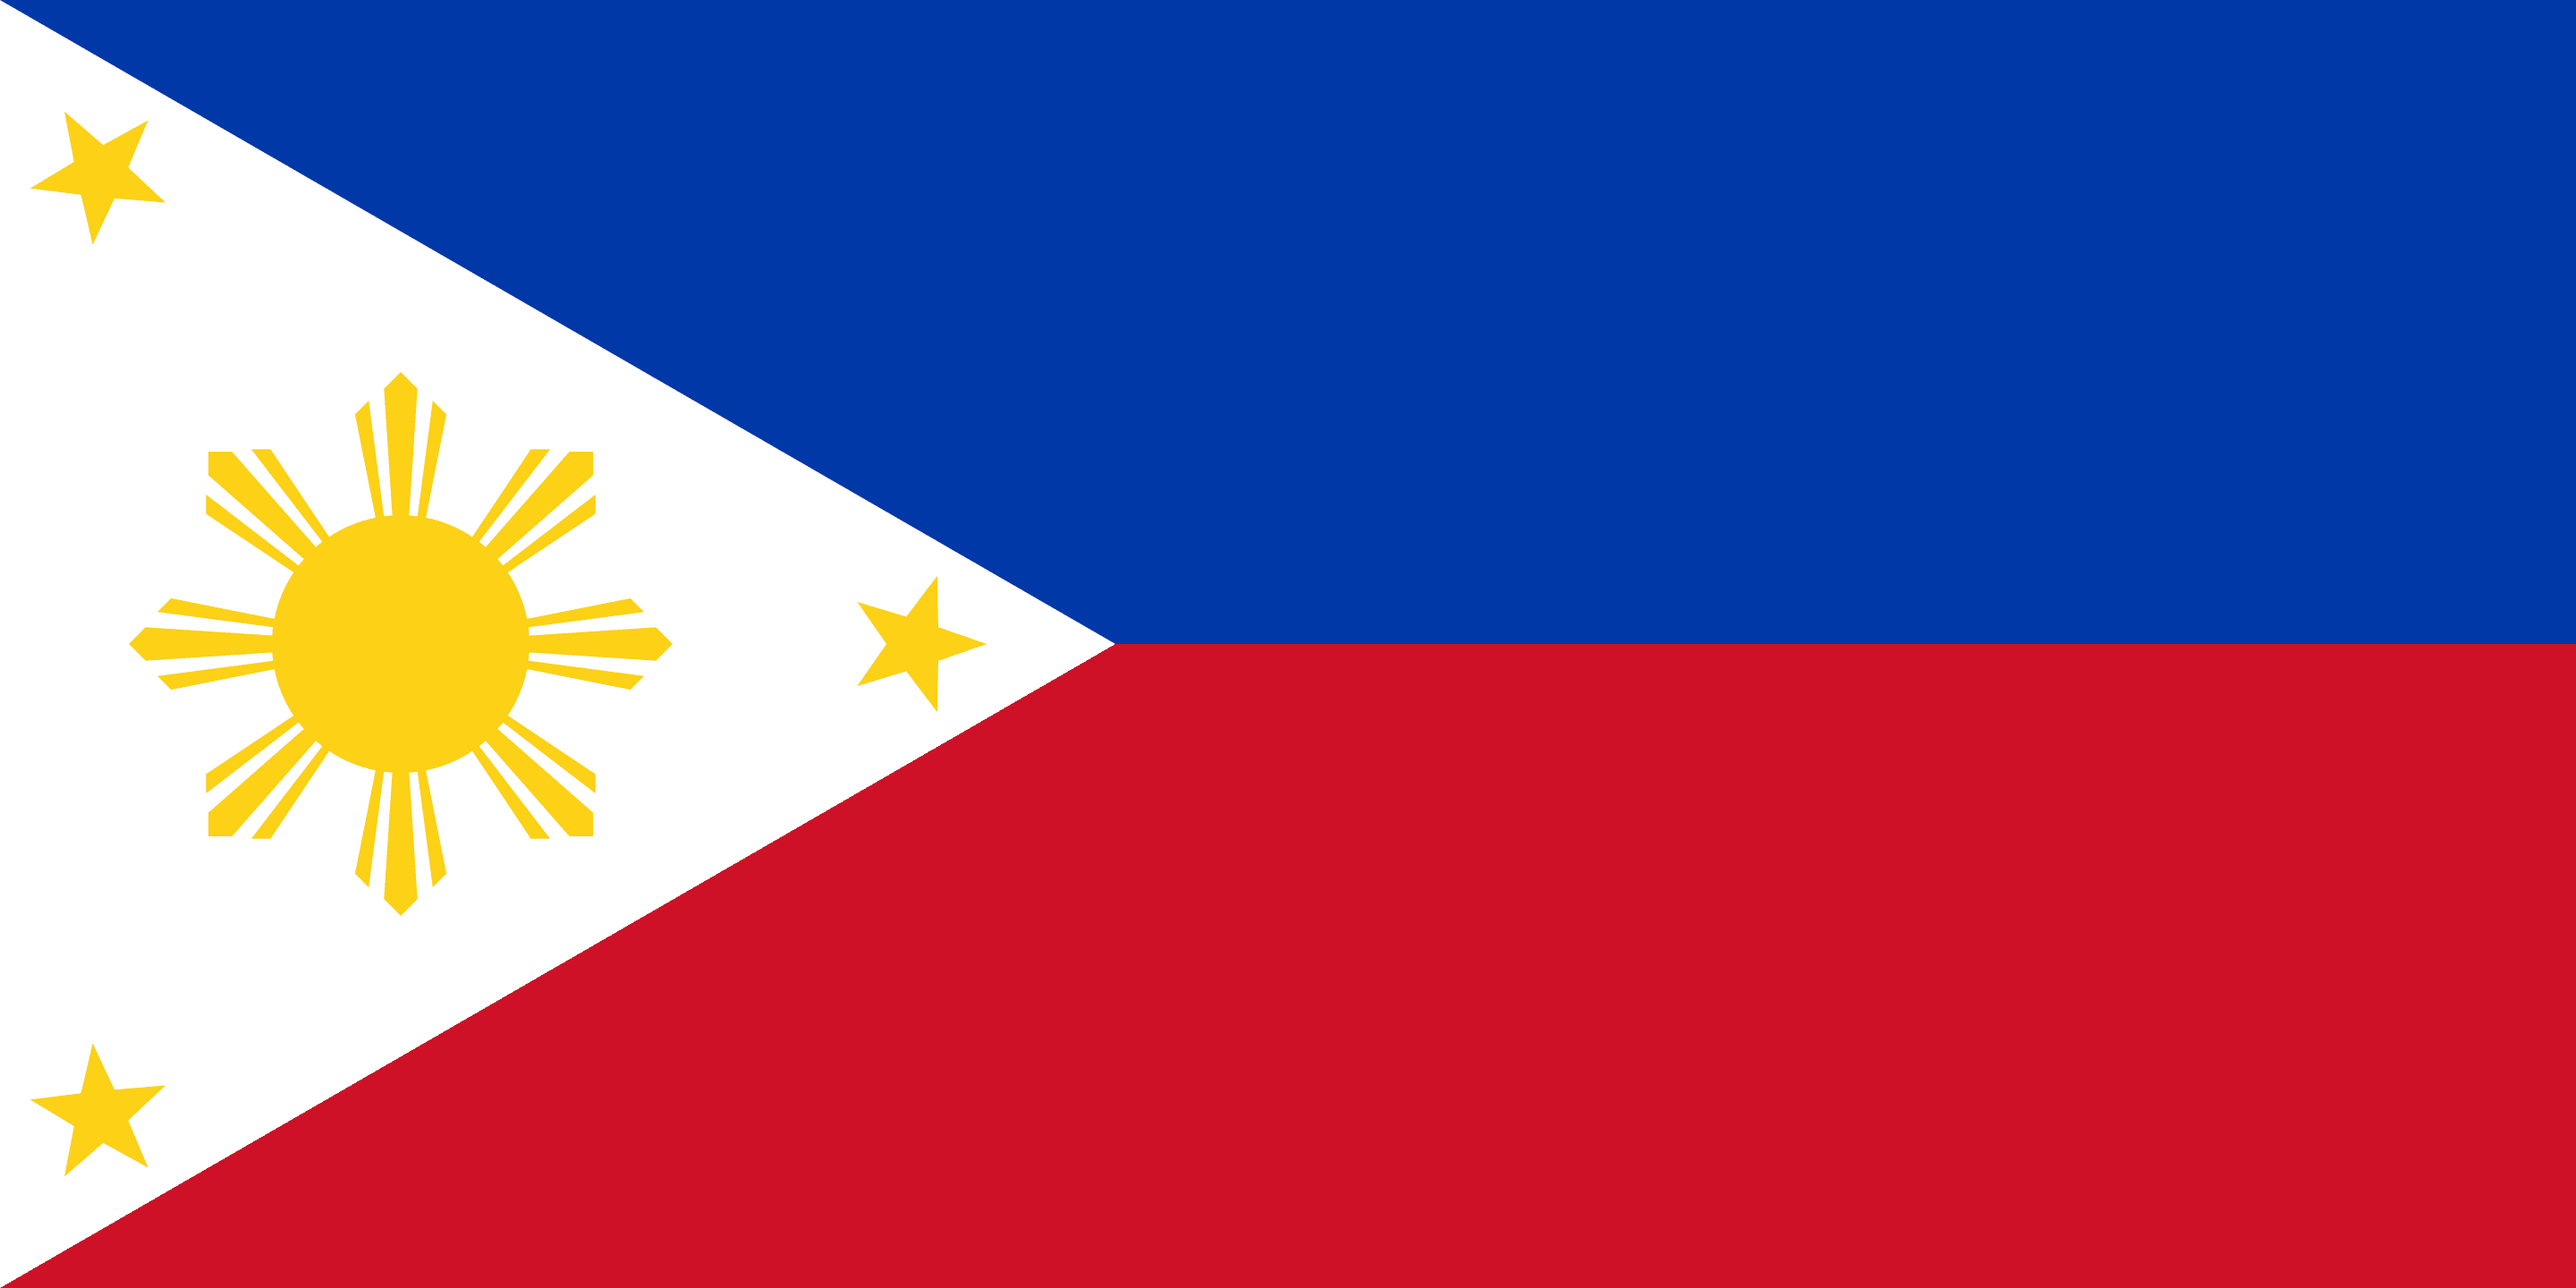 Facts of the Philippines